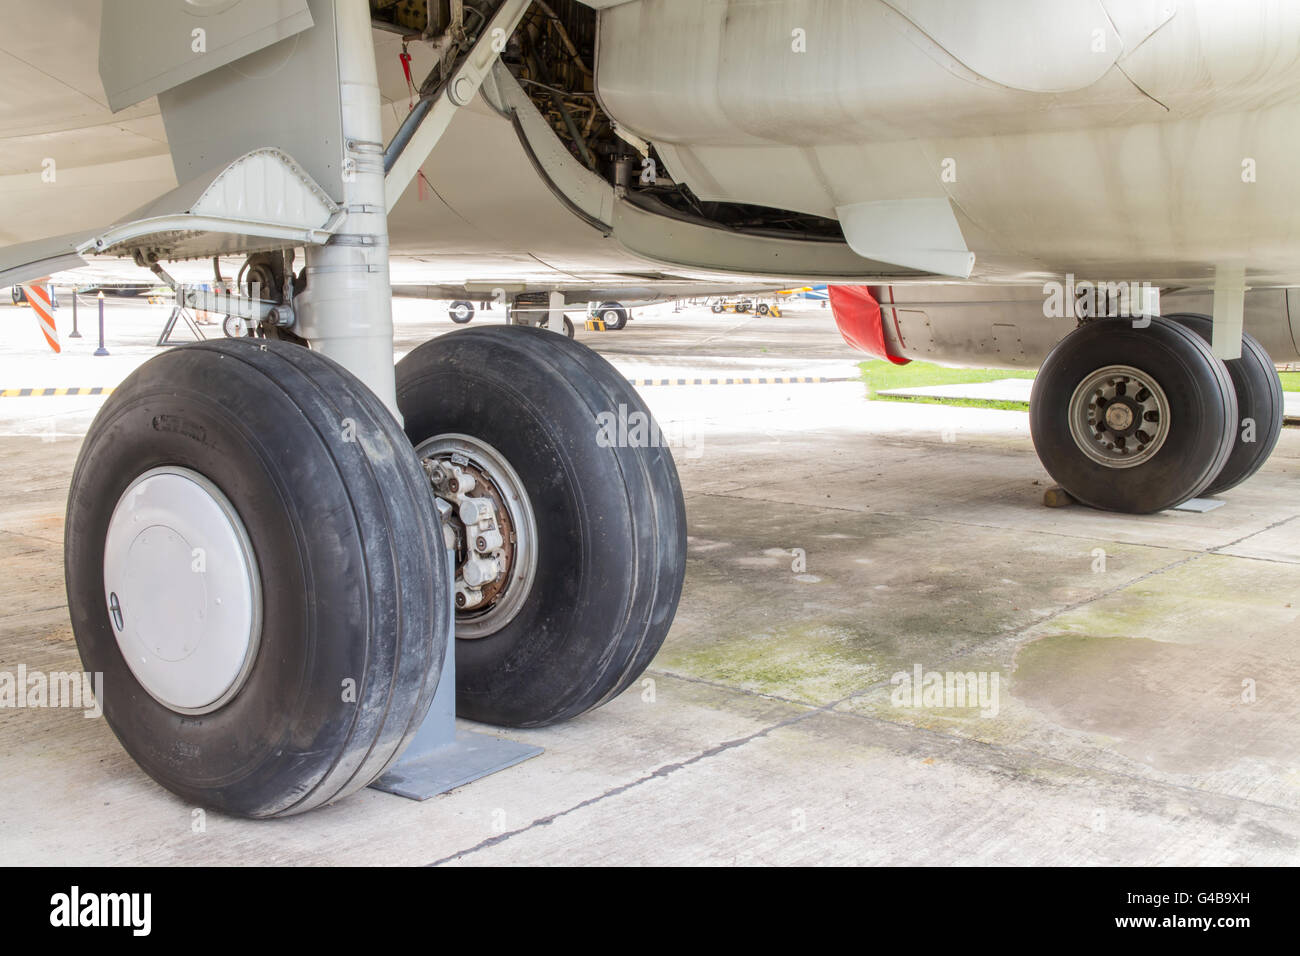 rear landing gear and engine passenger plane on the ground Stock Photo